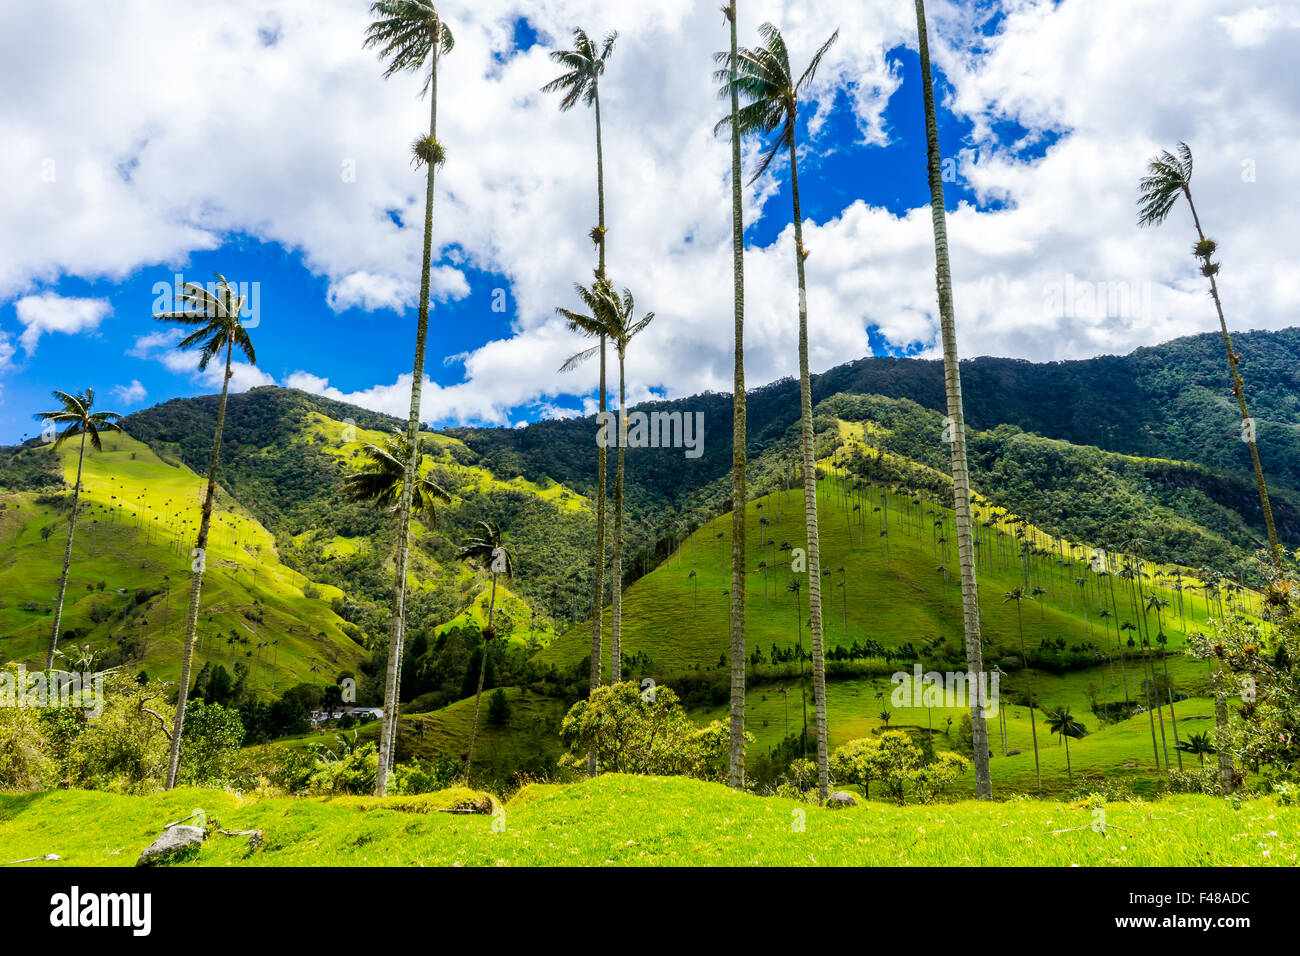 A walk through the Valle de Cocora with the world's tallest palms. June, 2015. Quindio, Colombia. Stock Photo